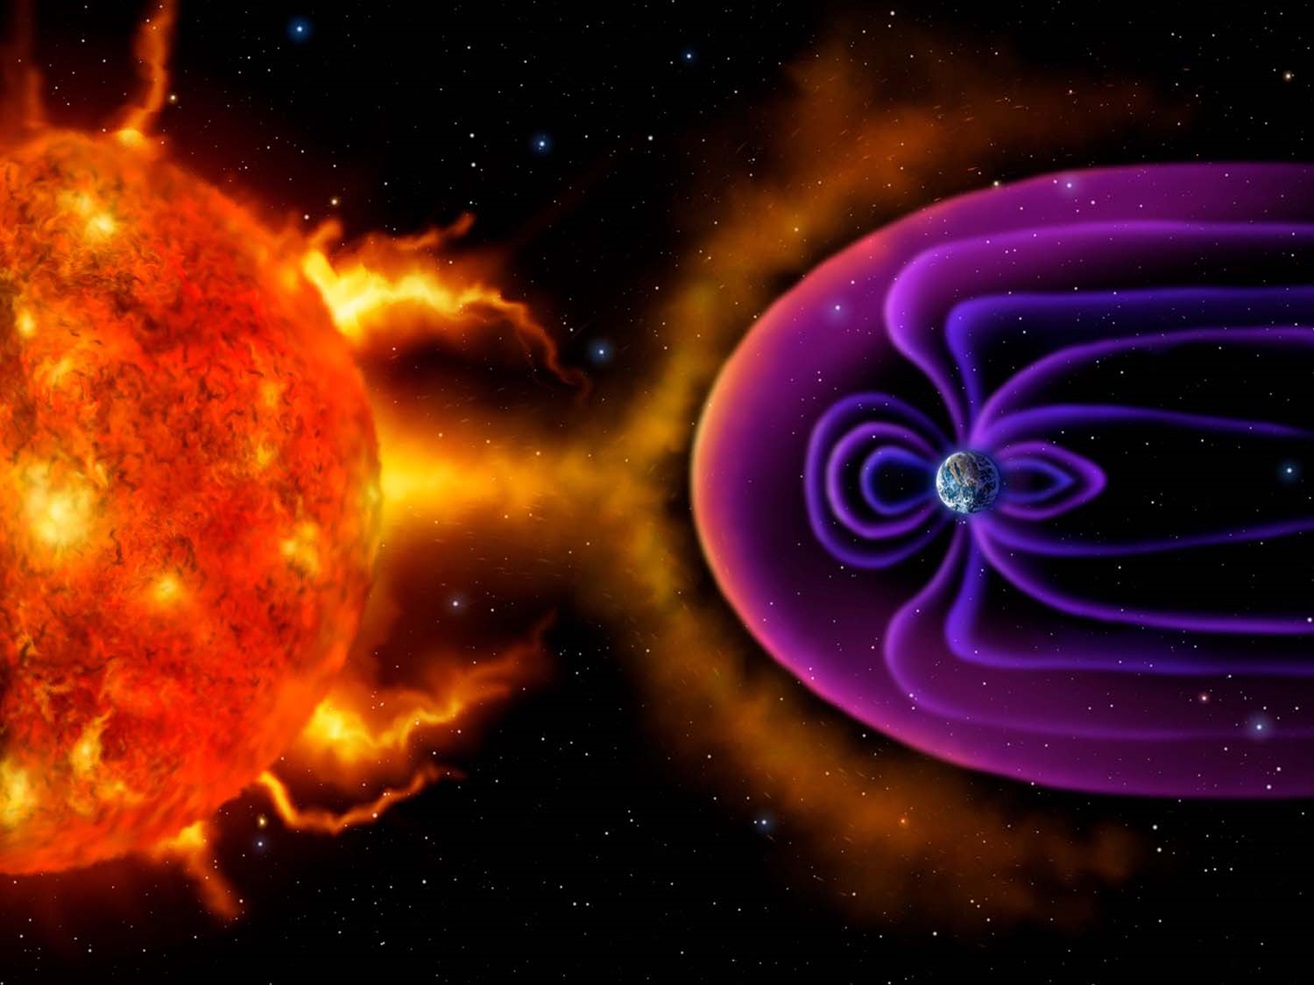 Digital illusustration of the Earth's Magnetosphere deflecting solar wind and radiation from the Sun